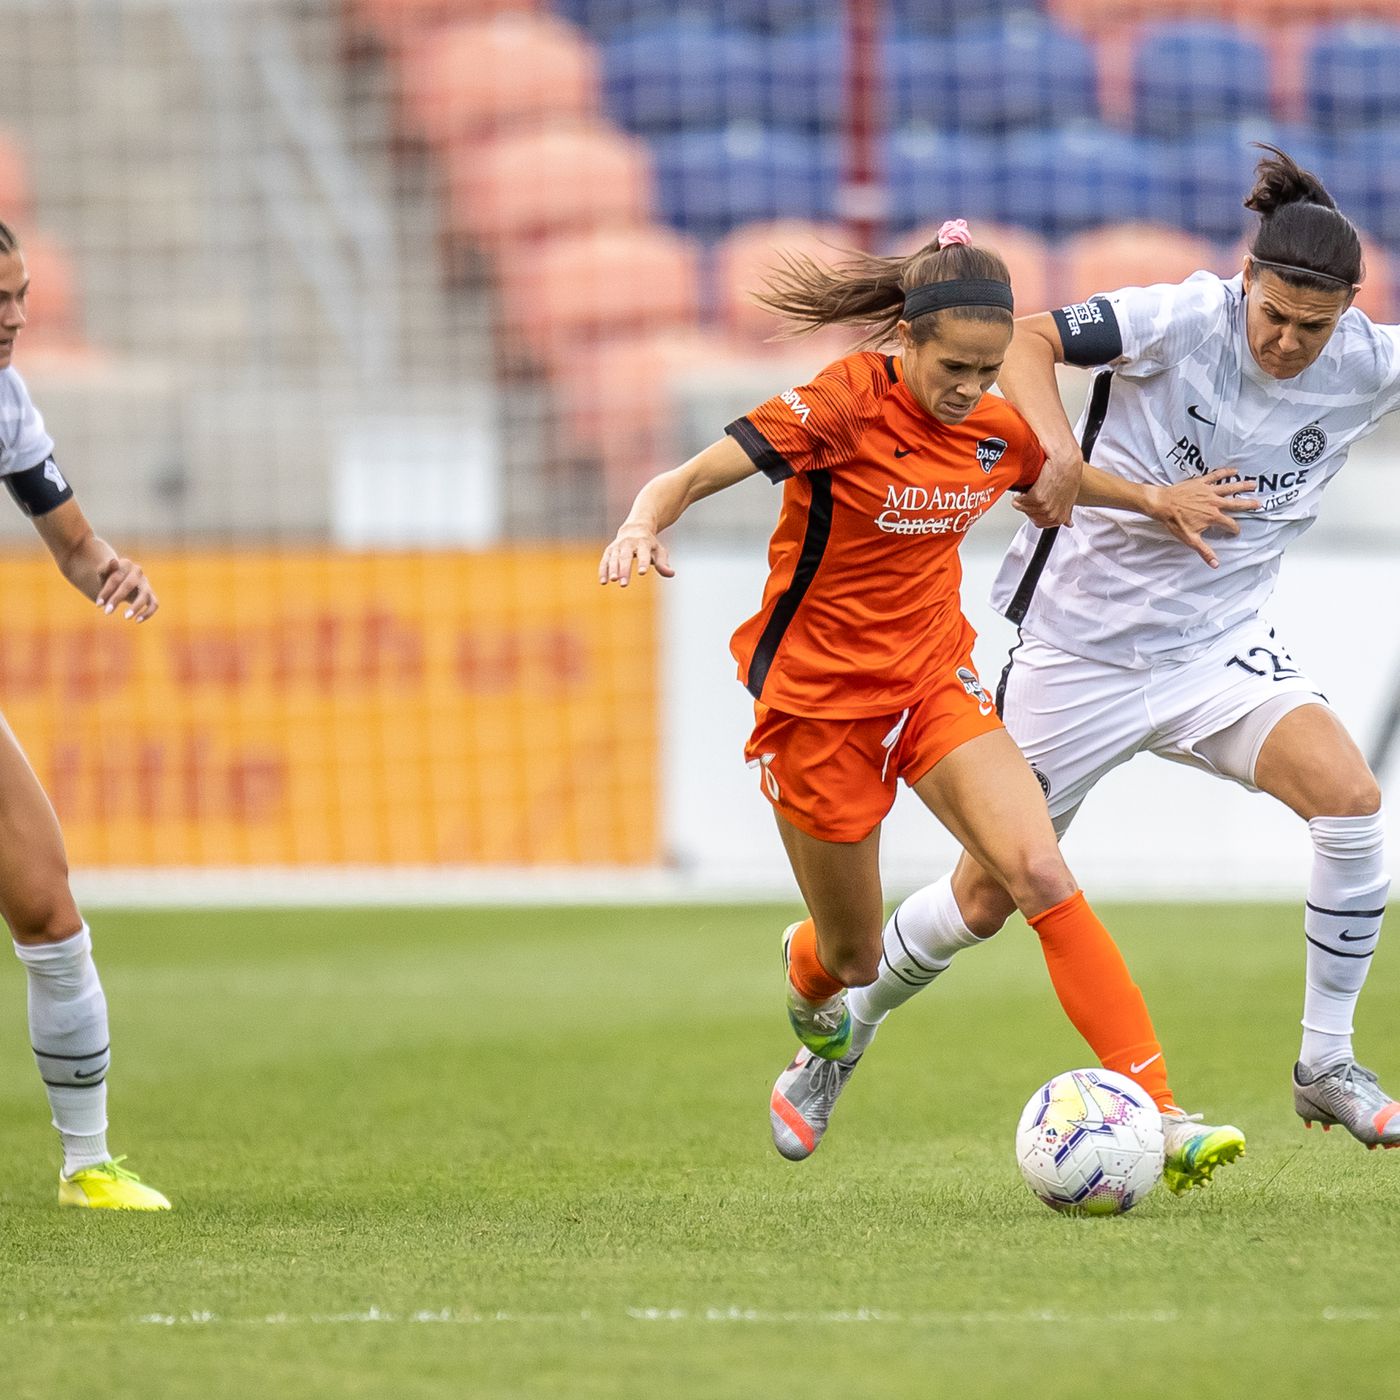 NWSL: Portland Thorns FC at Houston Dash - Key players and playing style of Houston Dash